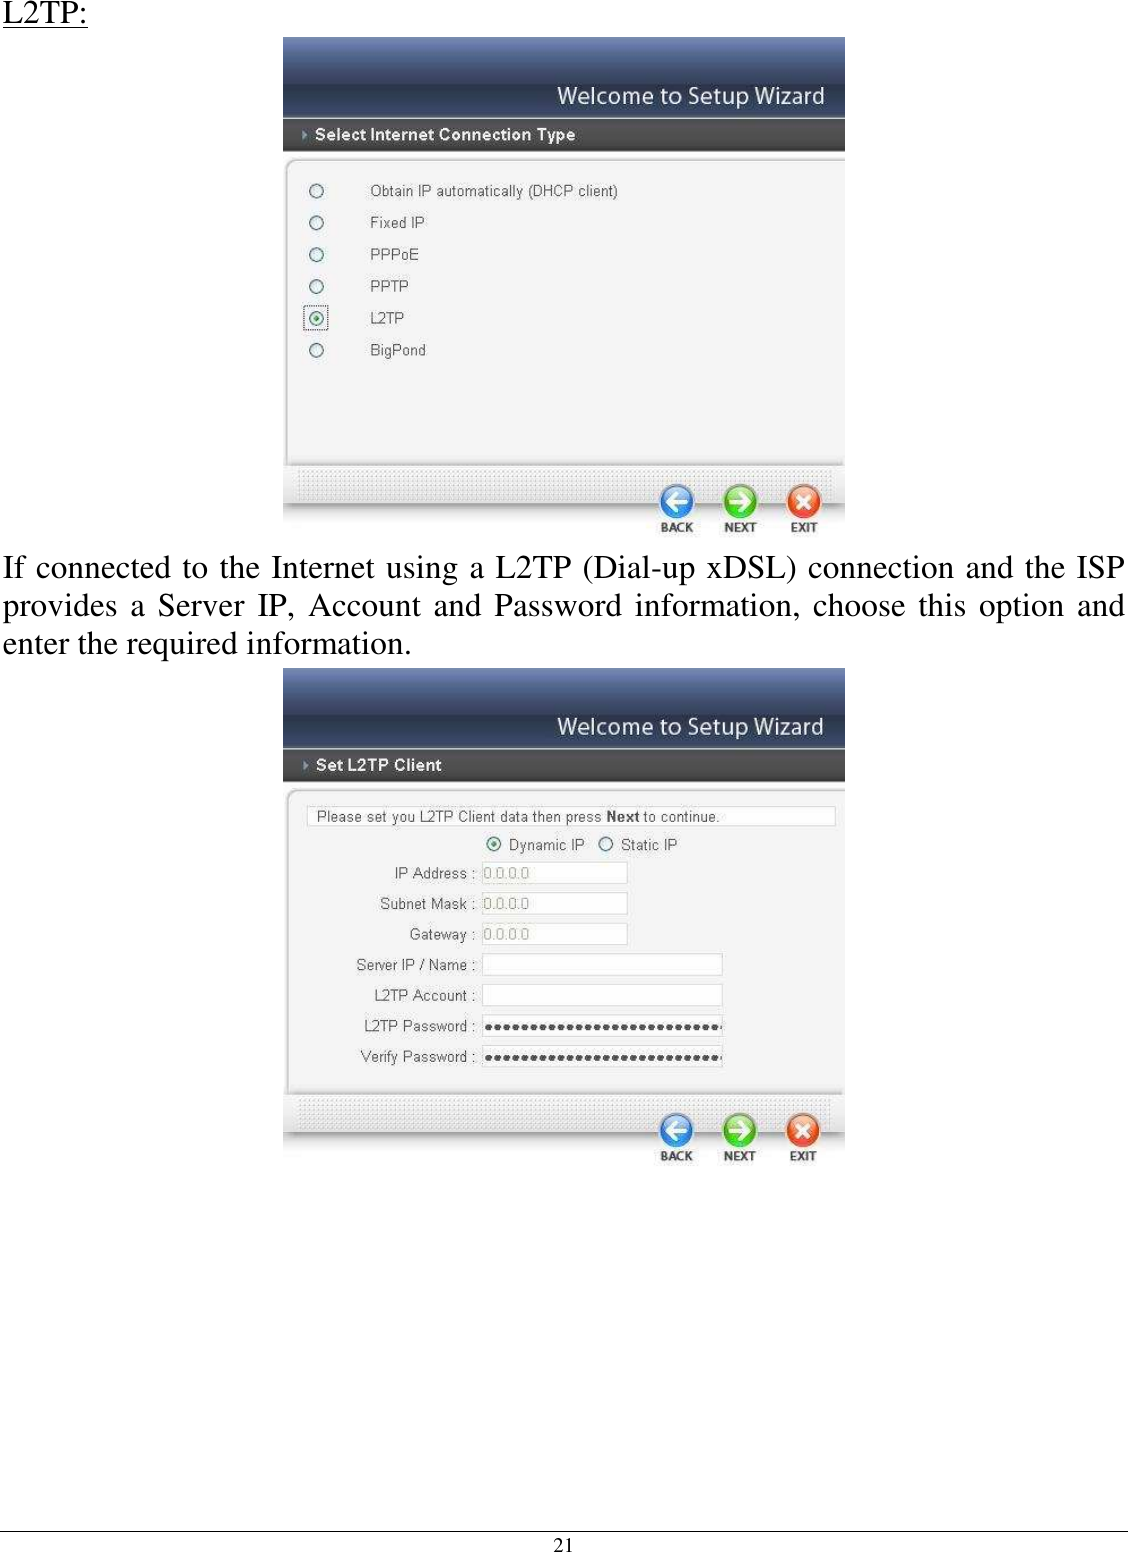 21 L2TP:  If connected to the Internet using a L2TP (Dial-up xDSL) connection and the ISP provides a Server IP, Account and Password information, choose this option and enter the required information.  